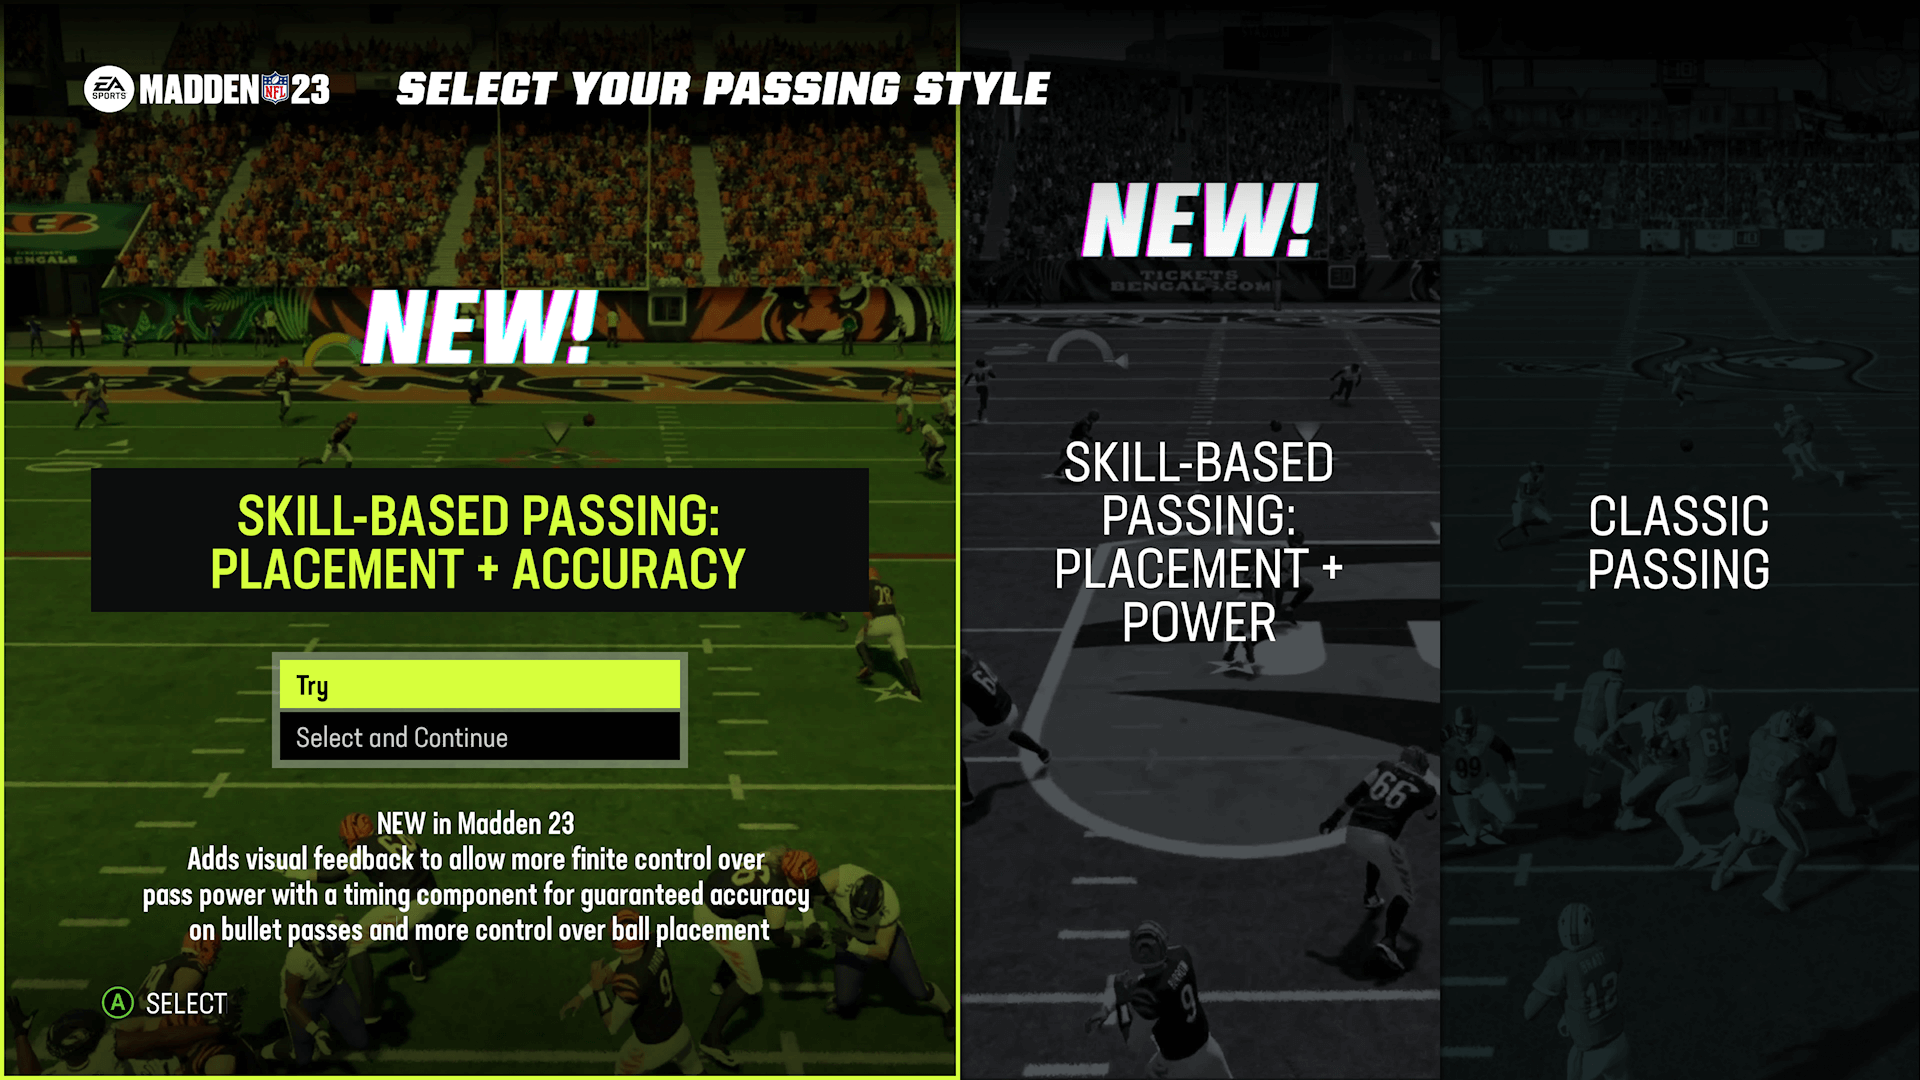 Madden NFL 23 - Passing styles